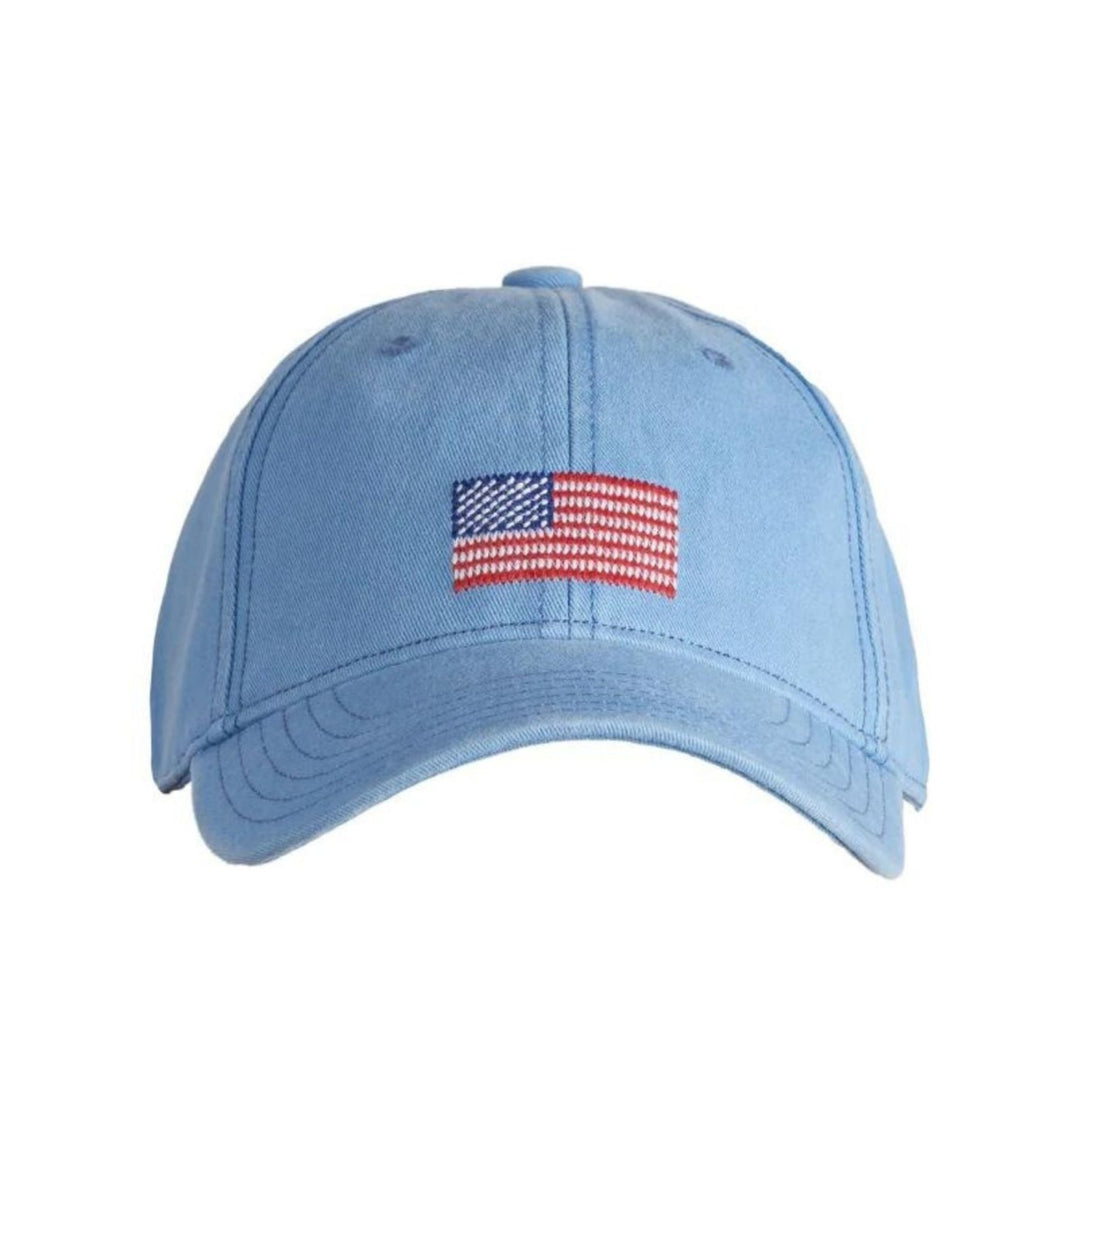 light blue hat with American flag